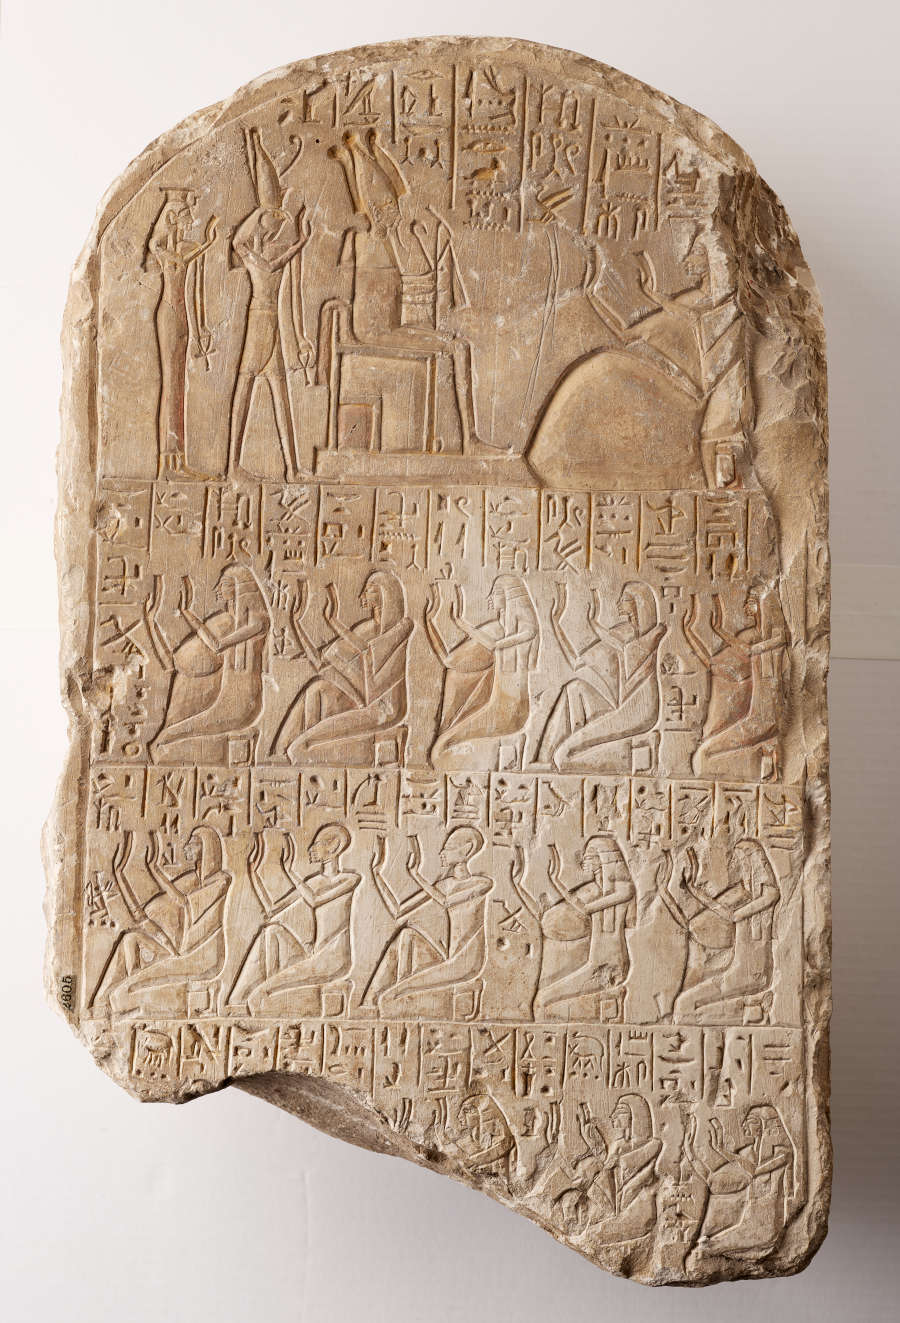 Thick weathered brown-gray long arched stone fragment against a wooden-textured background. The fragment features rows of raised lines forming figures kneeling and featuring towards one another, along with scripture.